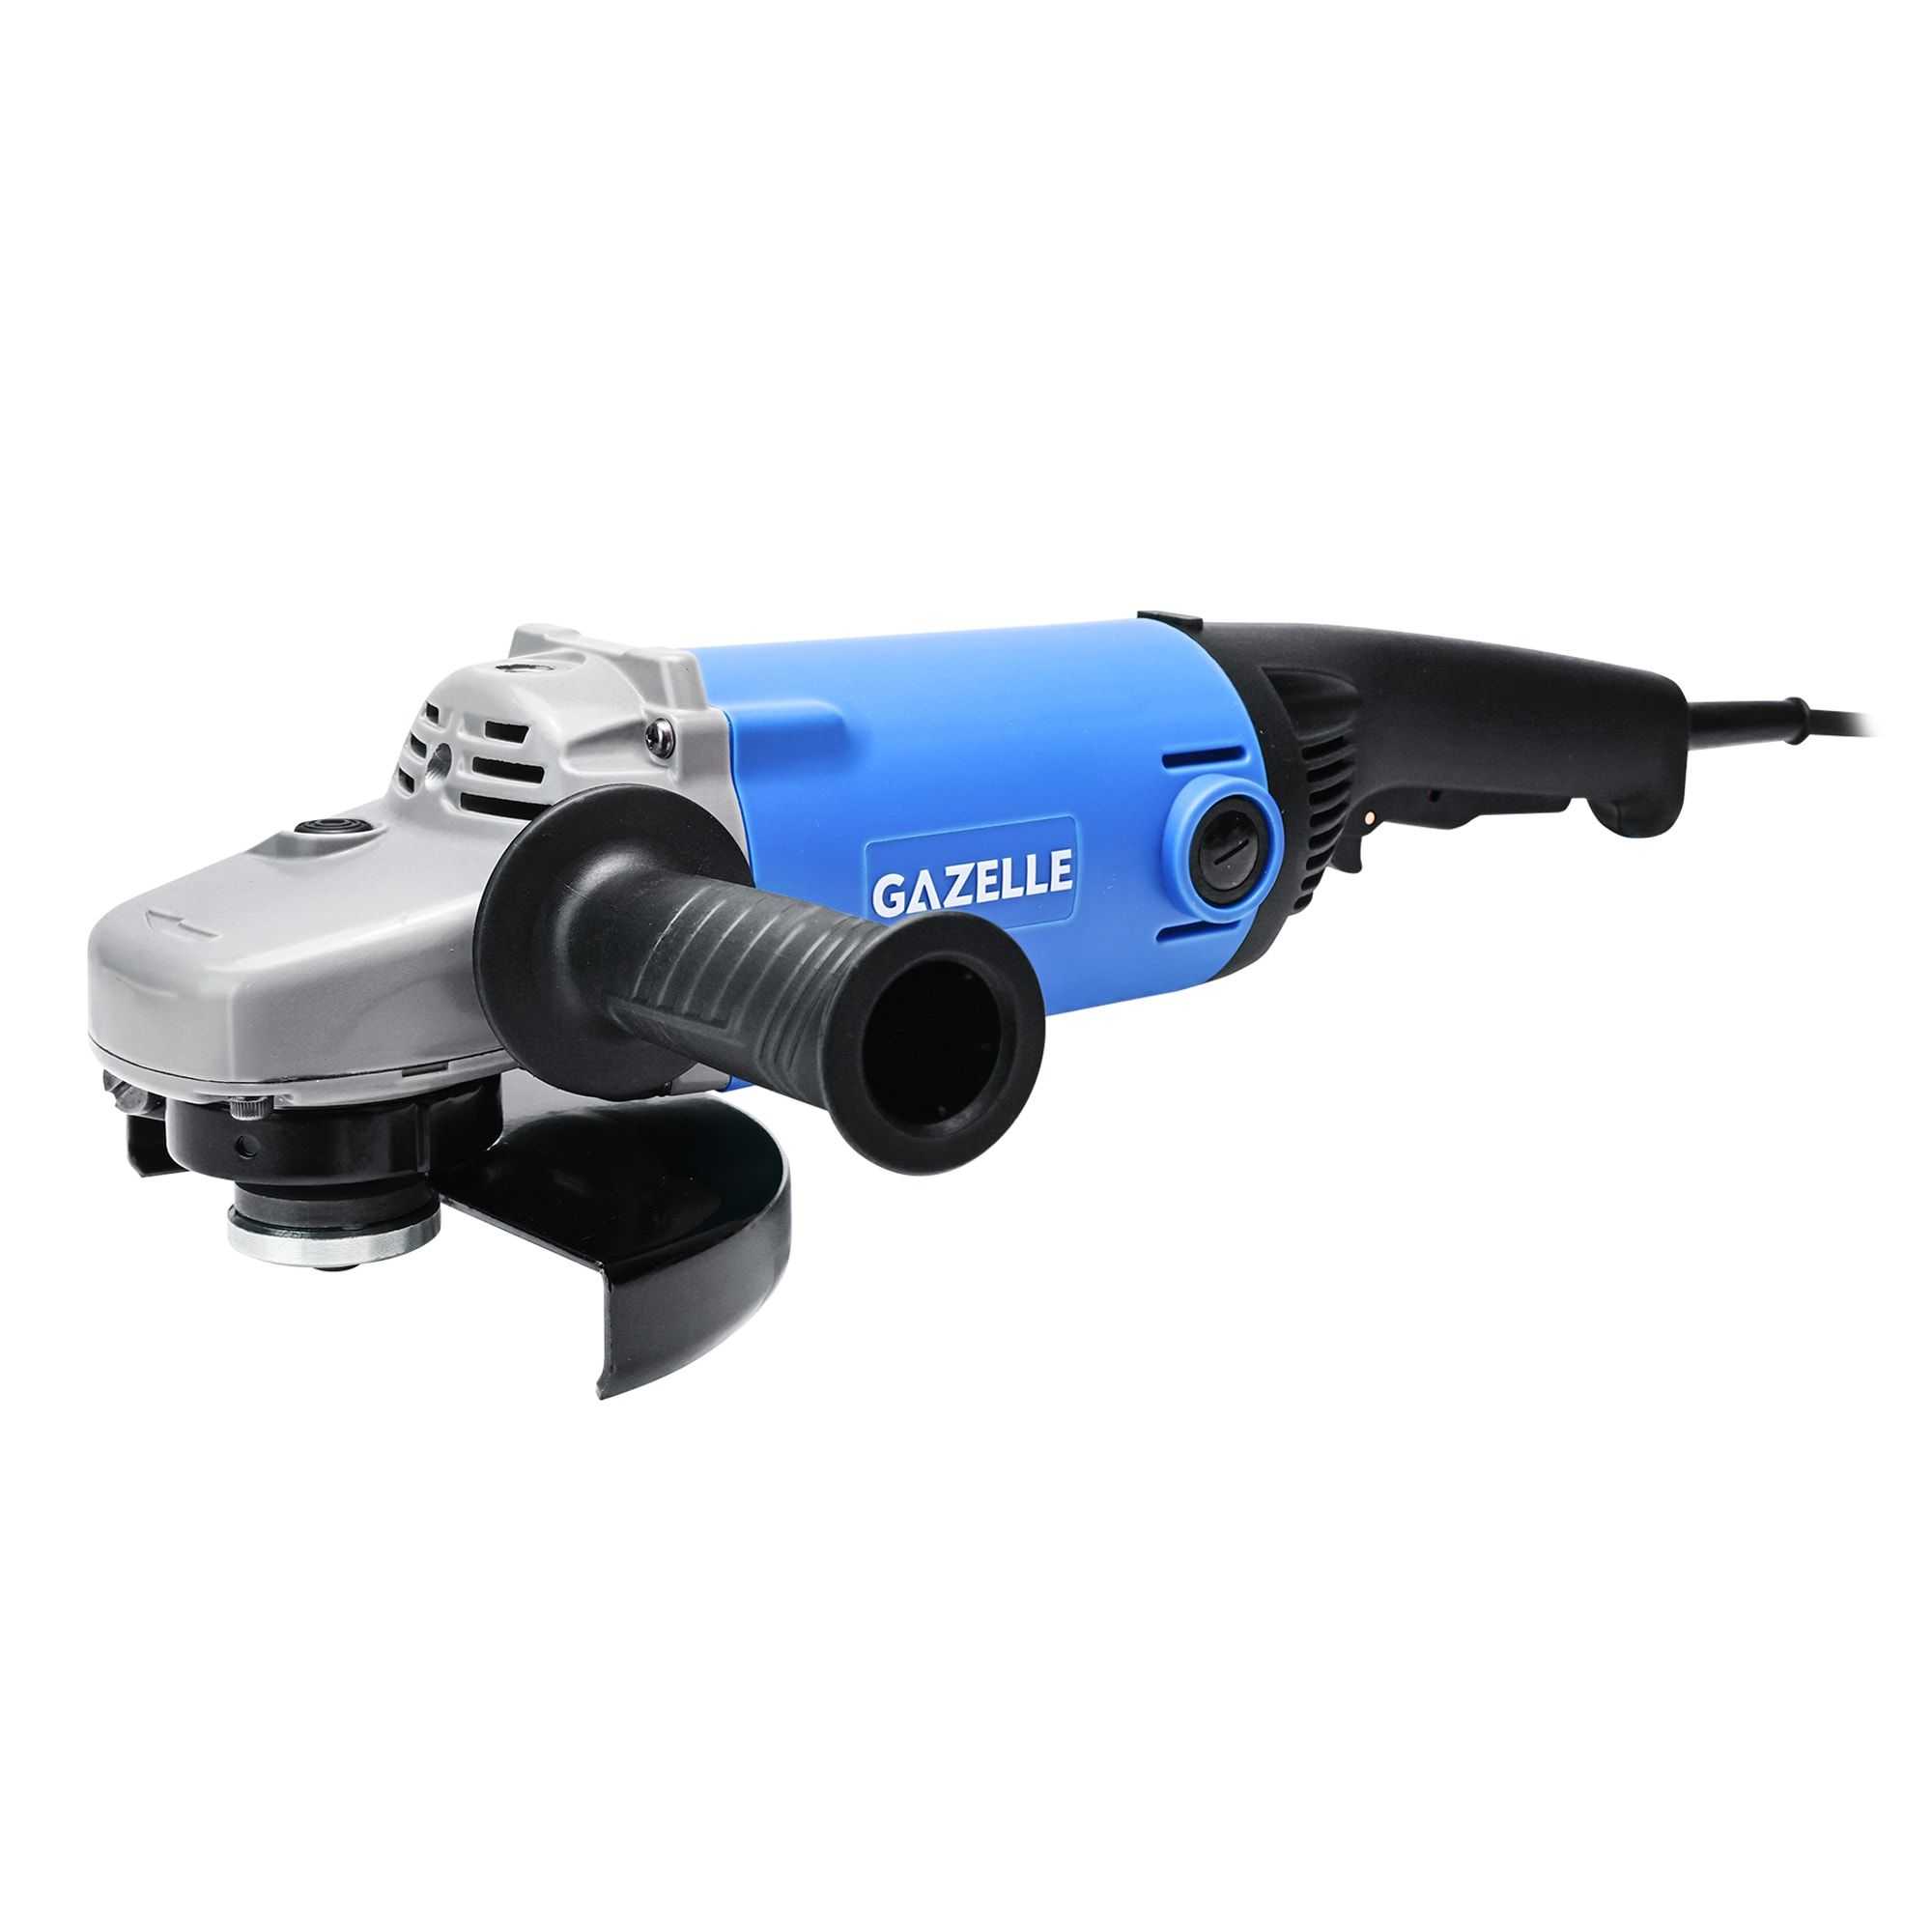 7" Angle Grinder 2200W Paddle Switch